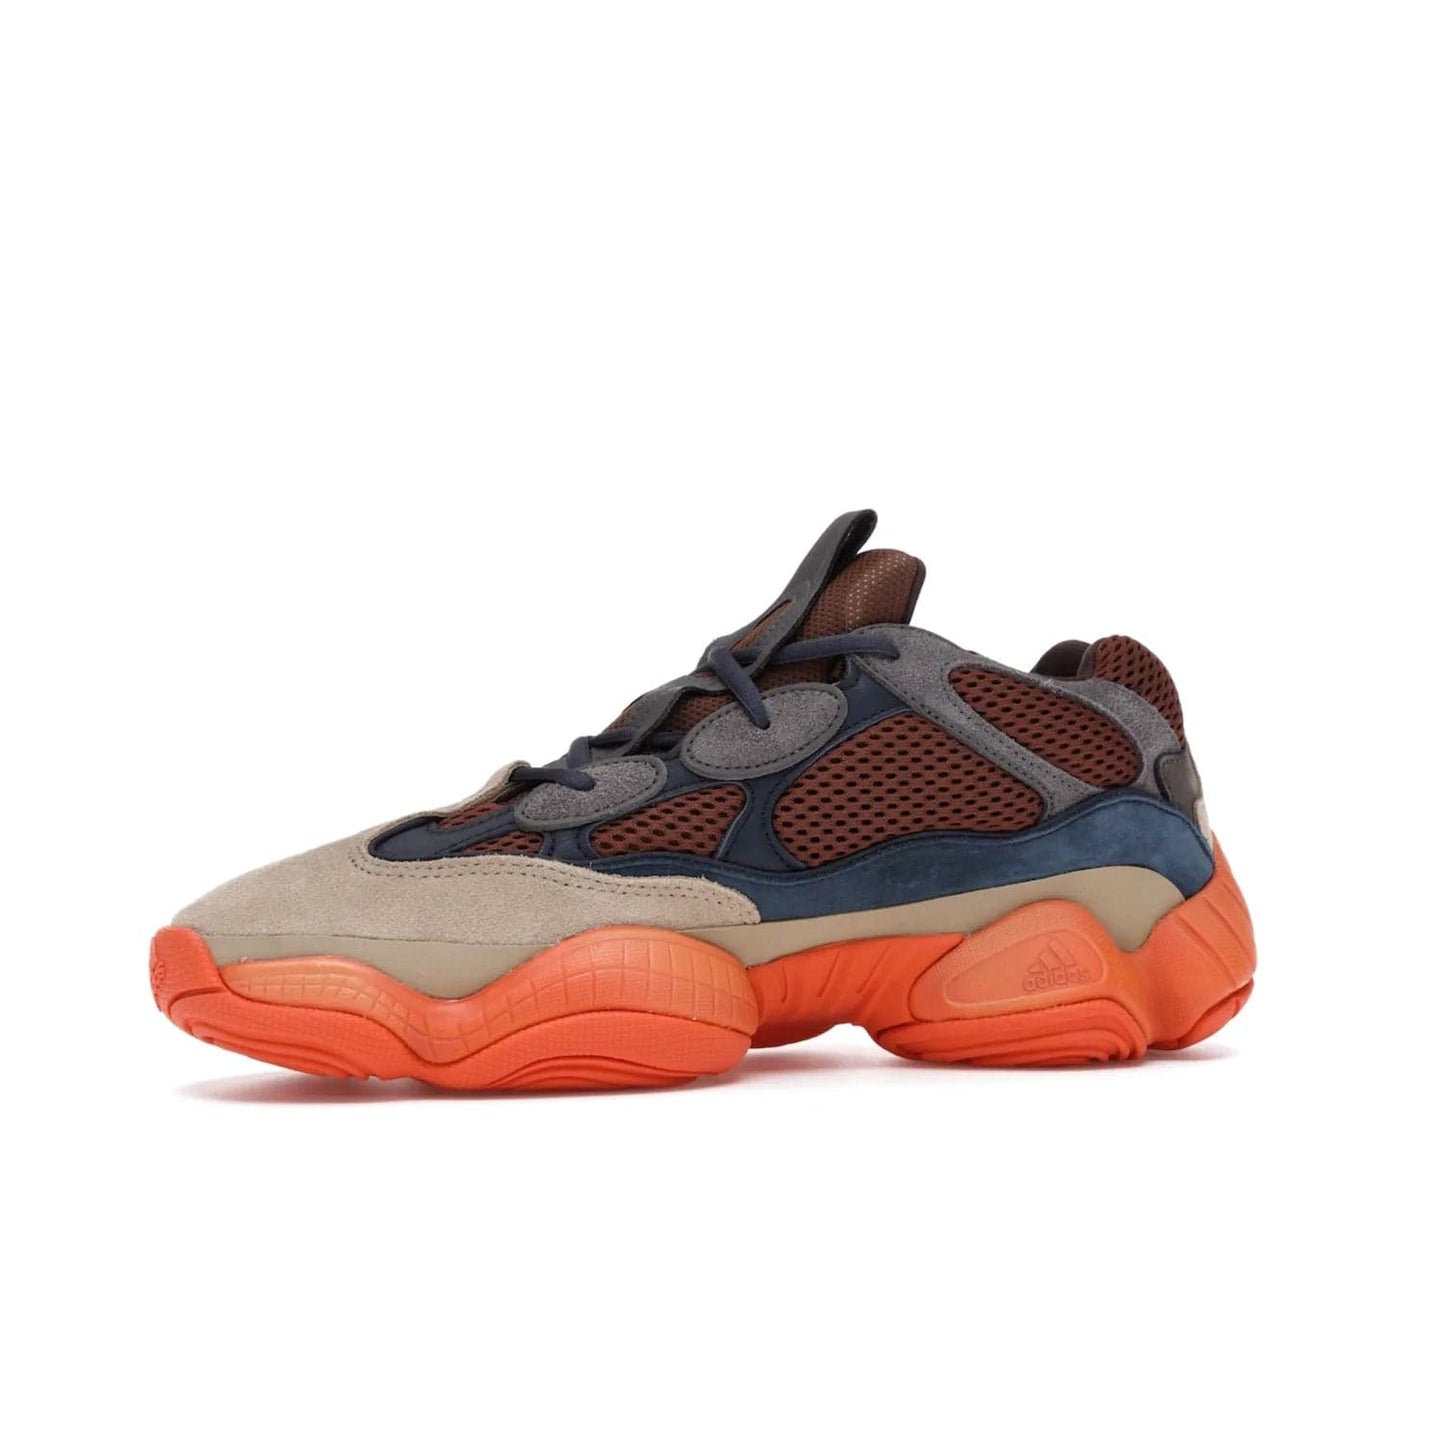 adidas Yeezy 500 Enflame - Image 17 - Only at www.BallersClubKickz.com - Step into style with the adidas Yeezy 500 Enflame. Mix of mesh, leather, and suede layered together to create tonal-brown, dark blue, & orange. Orange AdiPRENE sole provides superior cushioning & comfort. Get yours and experience maximum style.